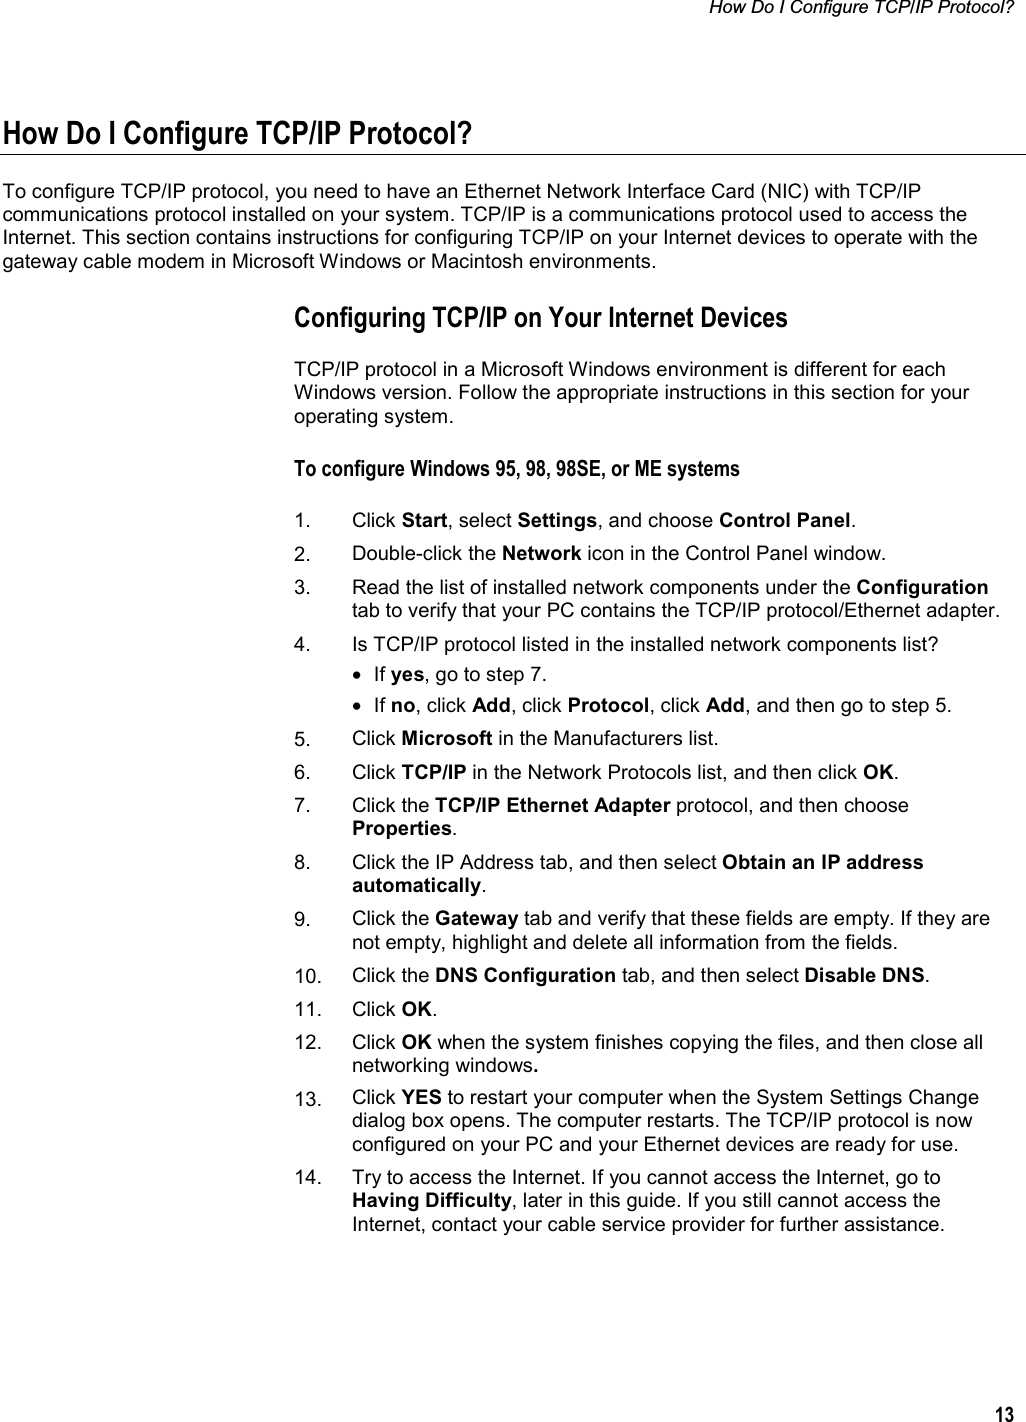 How Do I Configure TCP/IP Protocol? 13How Do I Configure TCP/IP Protocol? To configure TCP/IP protocol, you need to have an Ethernet Network Interface Card (NIC) with TCP/IP communications protocol installed on your system. TCP/IP is a communications protocol used to access the Internet. This section contains instructions for configuring TCP/IP on your Internet devices to operate with the gateway cable modem in Microsoft Windows or Macintosh environments.  Configuring TCP/IP on Your Internet Devices TCP/IP protocol in a Microsoft Windows environment is different for each Windows version. Follow the appropriate instructions in this section for your operating system. To configure Windows 95, 98, 98SE, or ME systems 1. Click Start, select Settings, and choose Control Panel.2. Double-click the Network icon in the Control Panel window.  3. Read the list of installed network components under the Configurationtab to verify that your PC contains the TCP/IP protocol/Ethernet adapter. 4.  Is TCP/IP protocol listed in the installed network components list? • If yes, go to step 7.  • If no, click Add, click Protocol, click Add, and then go to step 5. 5. Click Microsoft in the Manufacturers list. 6. Click TCP/IP in the Network Protocols list, and then click OK.7. Click the TCP/IP Ethernet Adapter protocol, and then choose Properties.8. Click the IP Address tab, and then select Obtain an IP address automatically.9. Click the Gateway tab and verify that these fields are empty. If they are not empty, highlight and delete all information from the fields. 10. Click the DNS Configuration tab, and then select Disable DNS.11. Click OK.12. Click OK when the system finishes copying the files, and then close all networking windows.13. Click YES to restart your computer when the System Settings Change dialog box opens. The computer restarts. The TCP/IP protocol is now configured on your PC and your Ethernet devices are ready for use. 14.  Try to access the Internet. If you cannot access the Internet, go to Having Difficulty, later in this guide. If you still cannot access the Internet, contact your cable service provider for further assistance. 